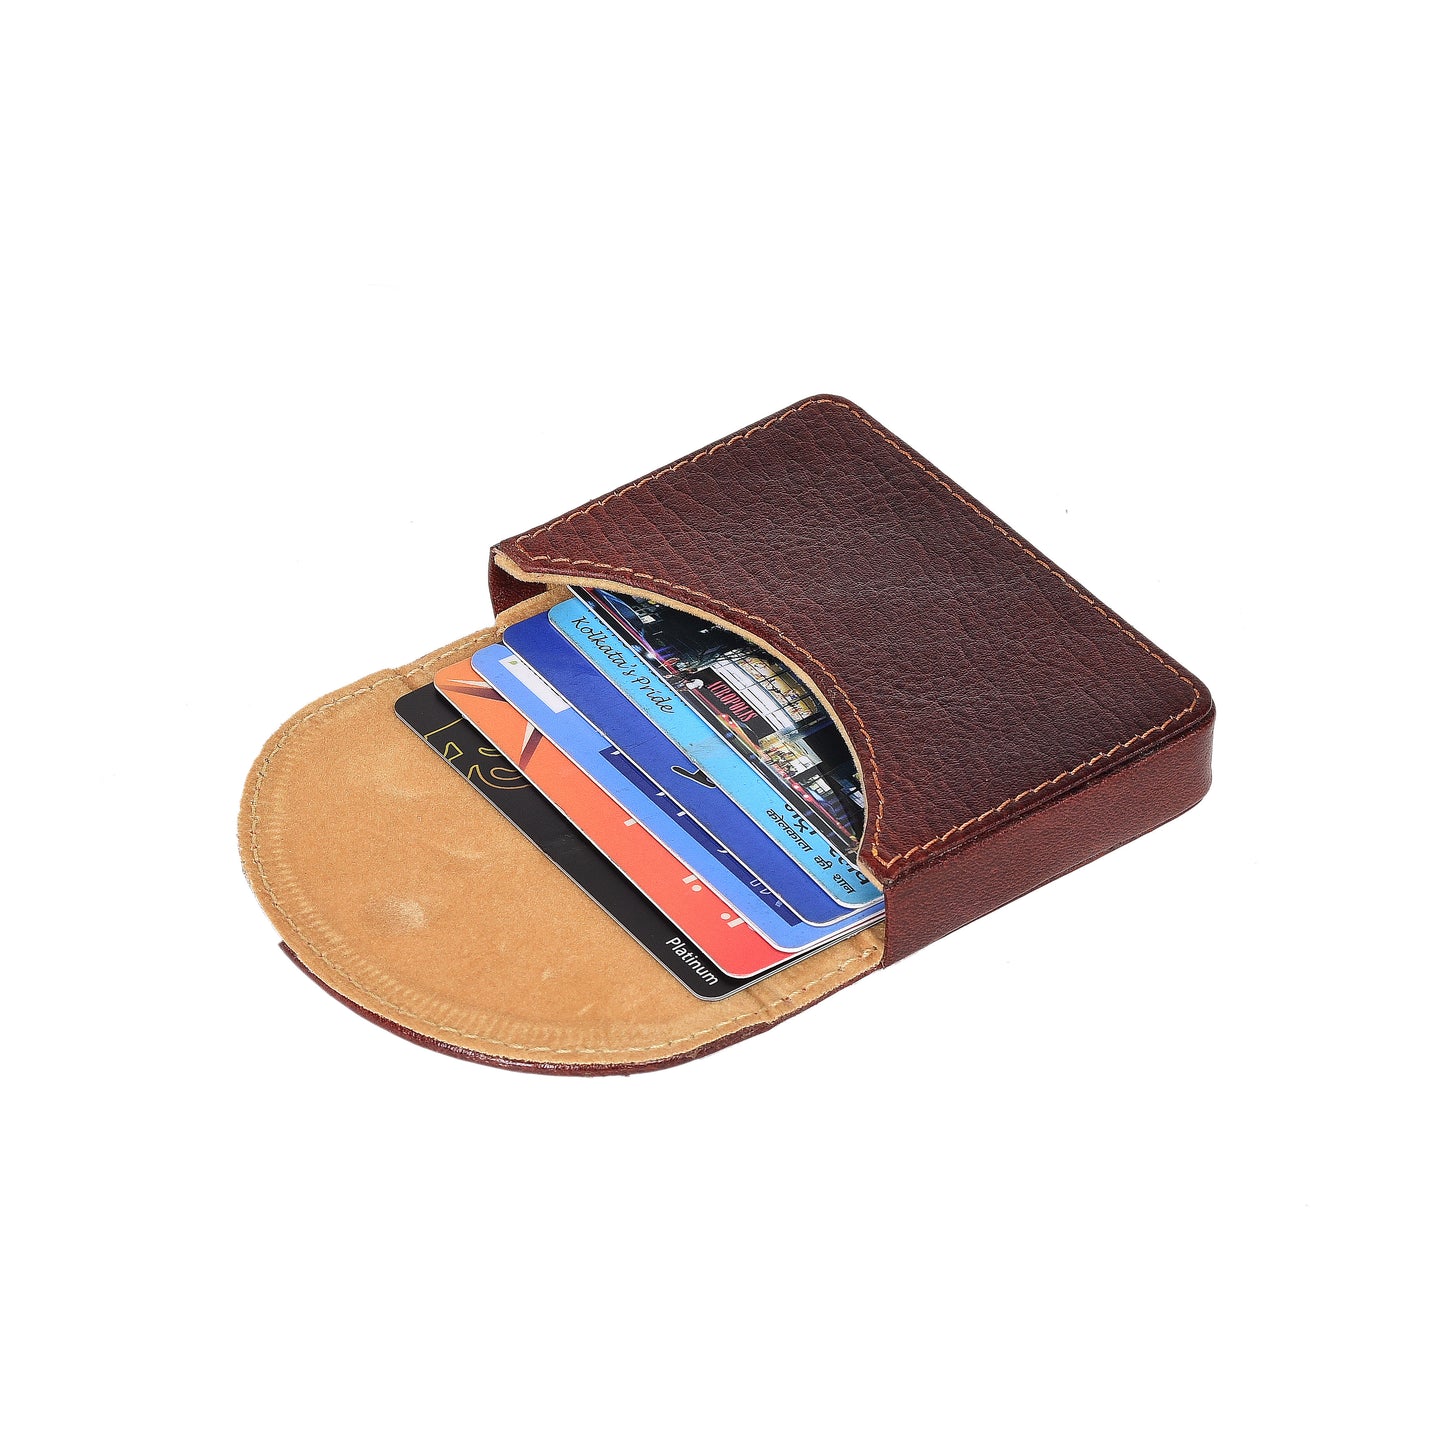 Genuine Leather Credit Card Holder Business Card Organizer Leather Card Case